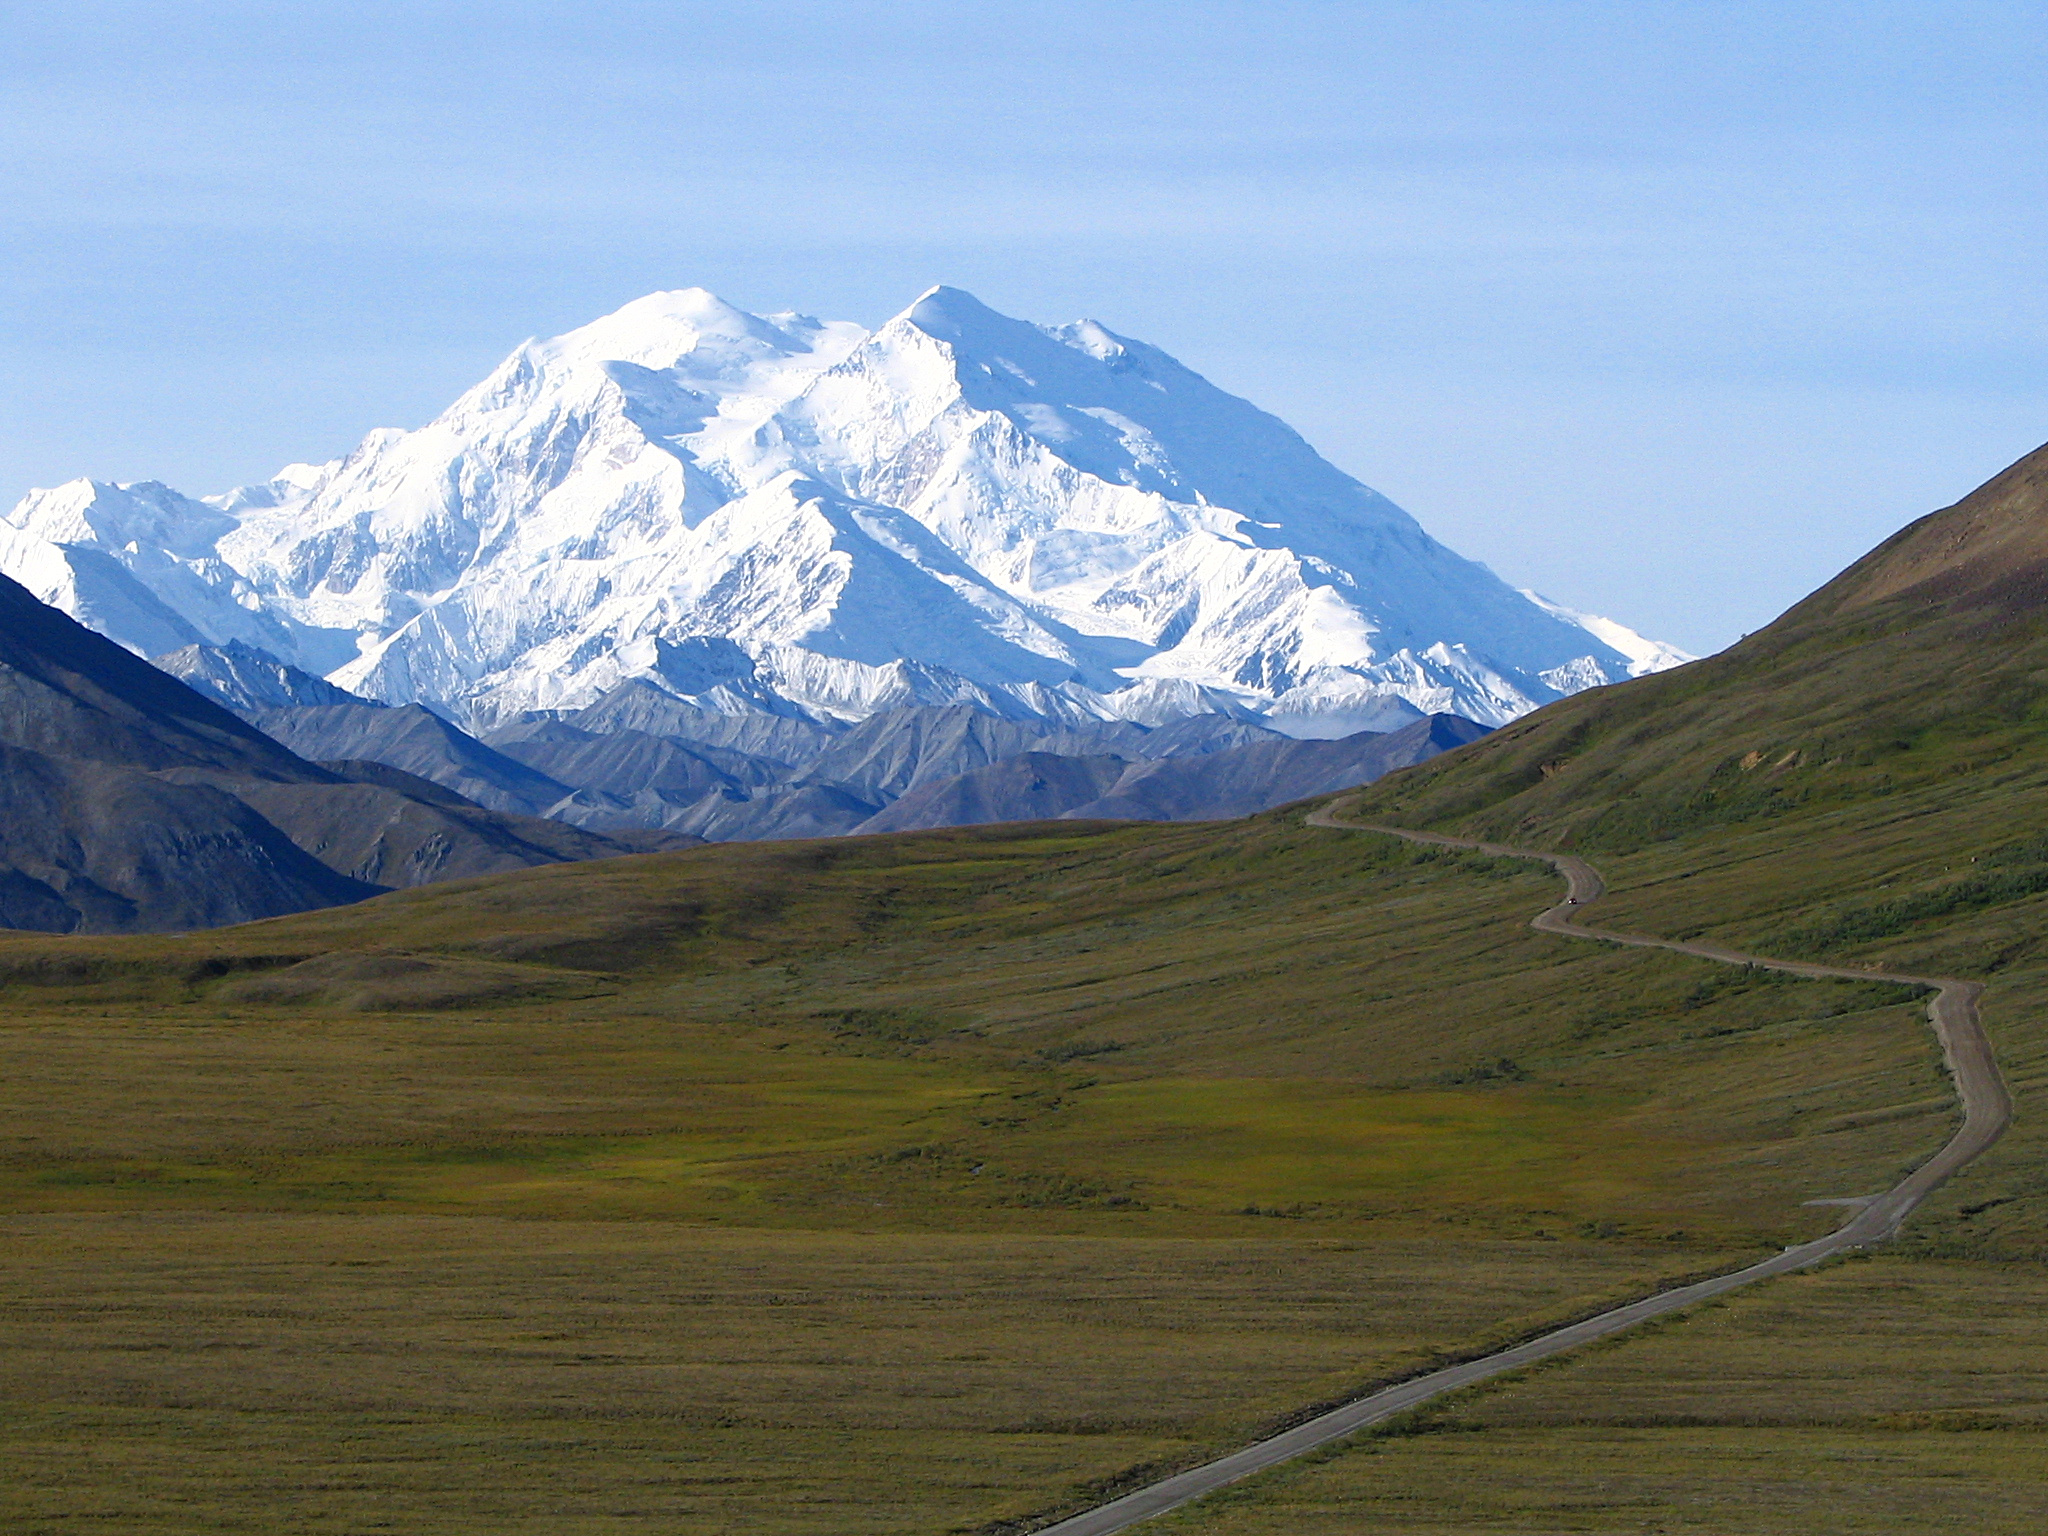 File:Mount McKinley and Denali National Park Road 2048px.jpg ...